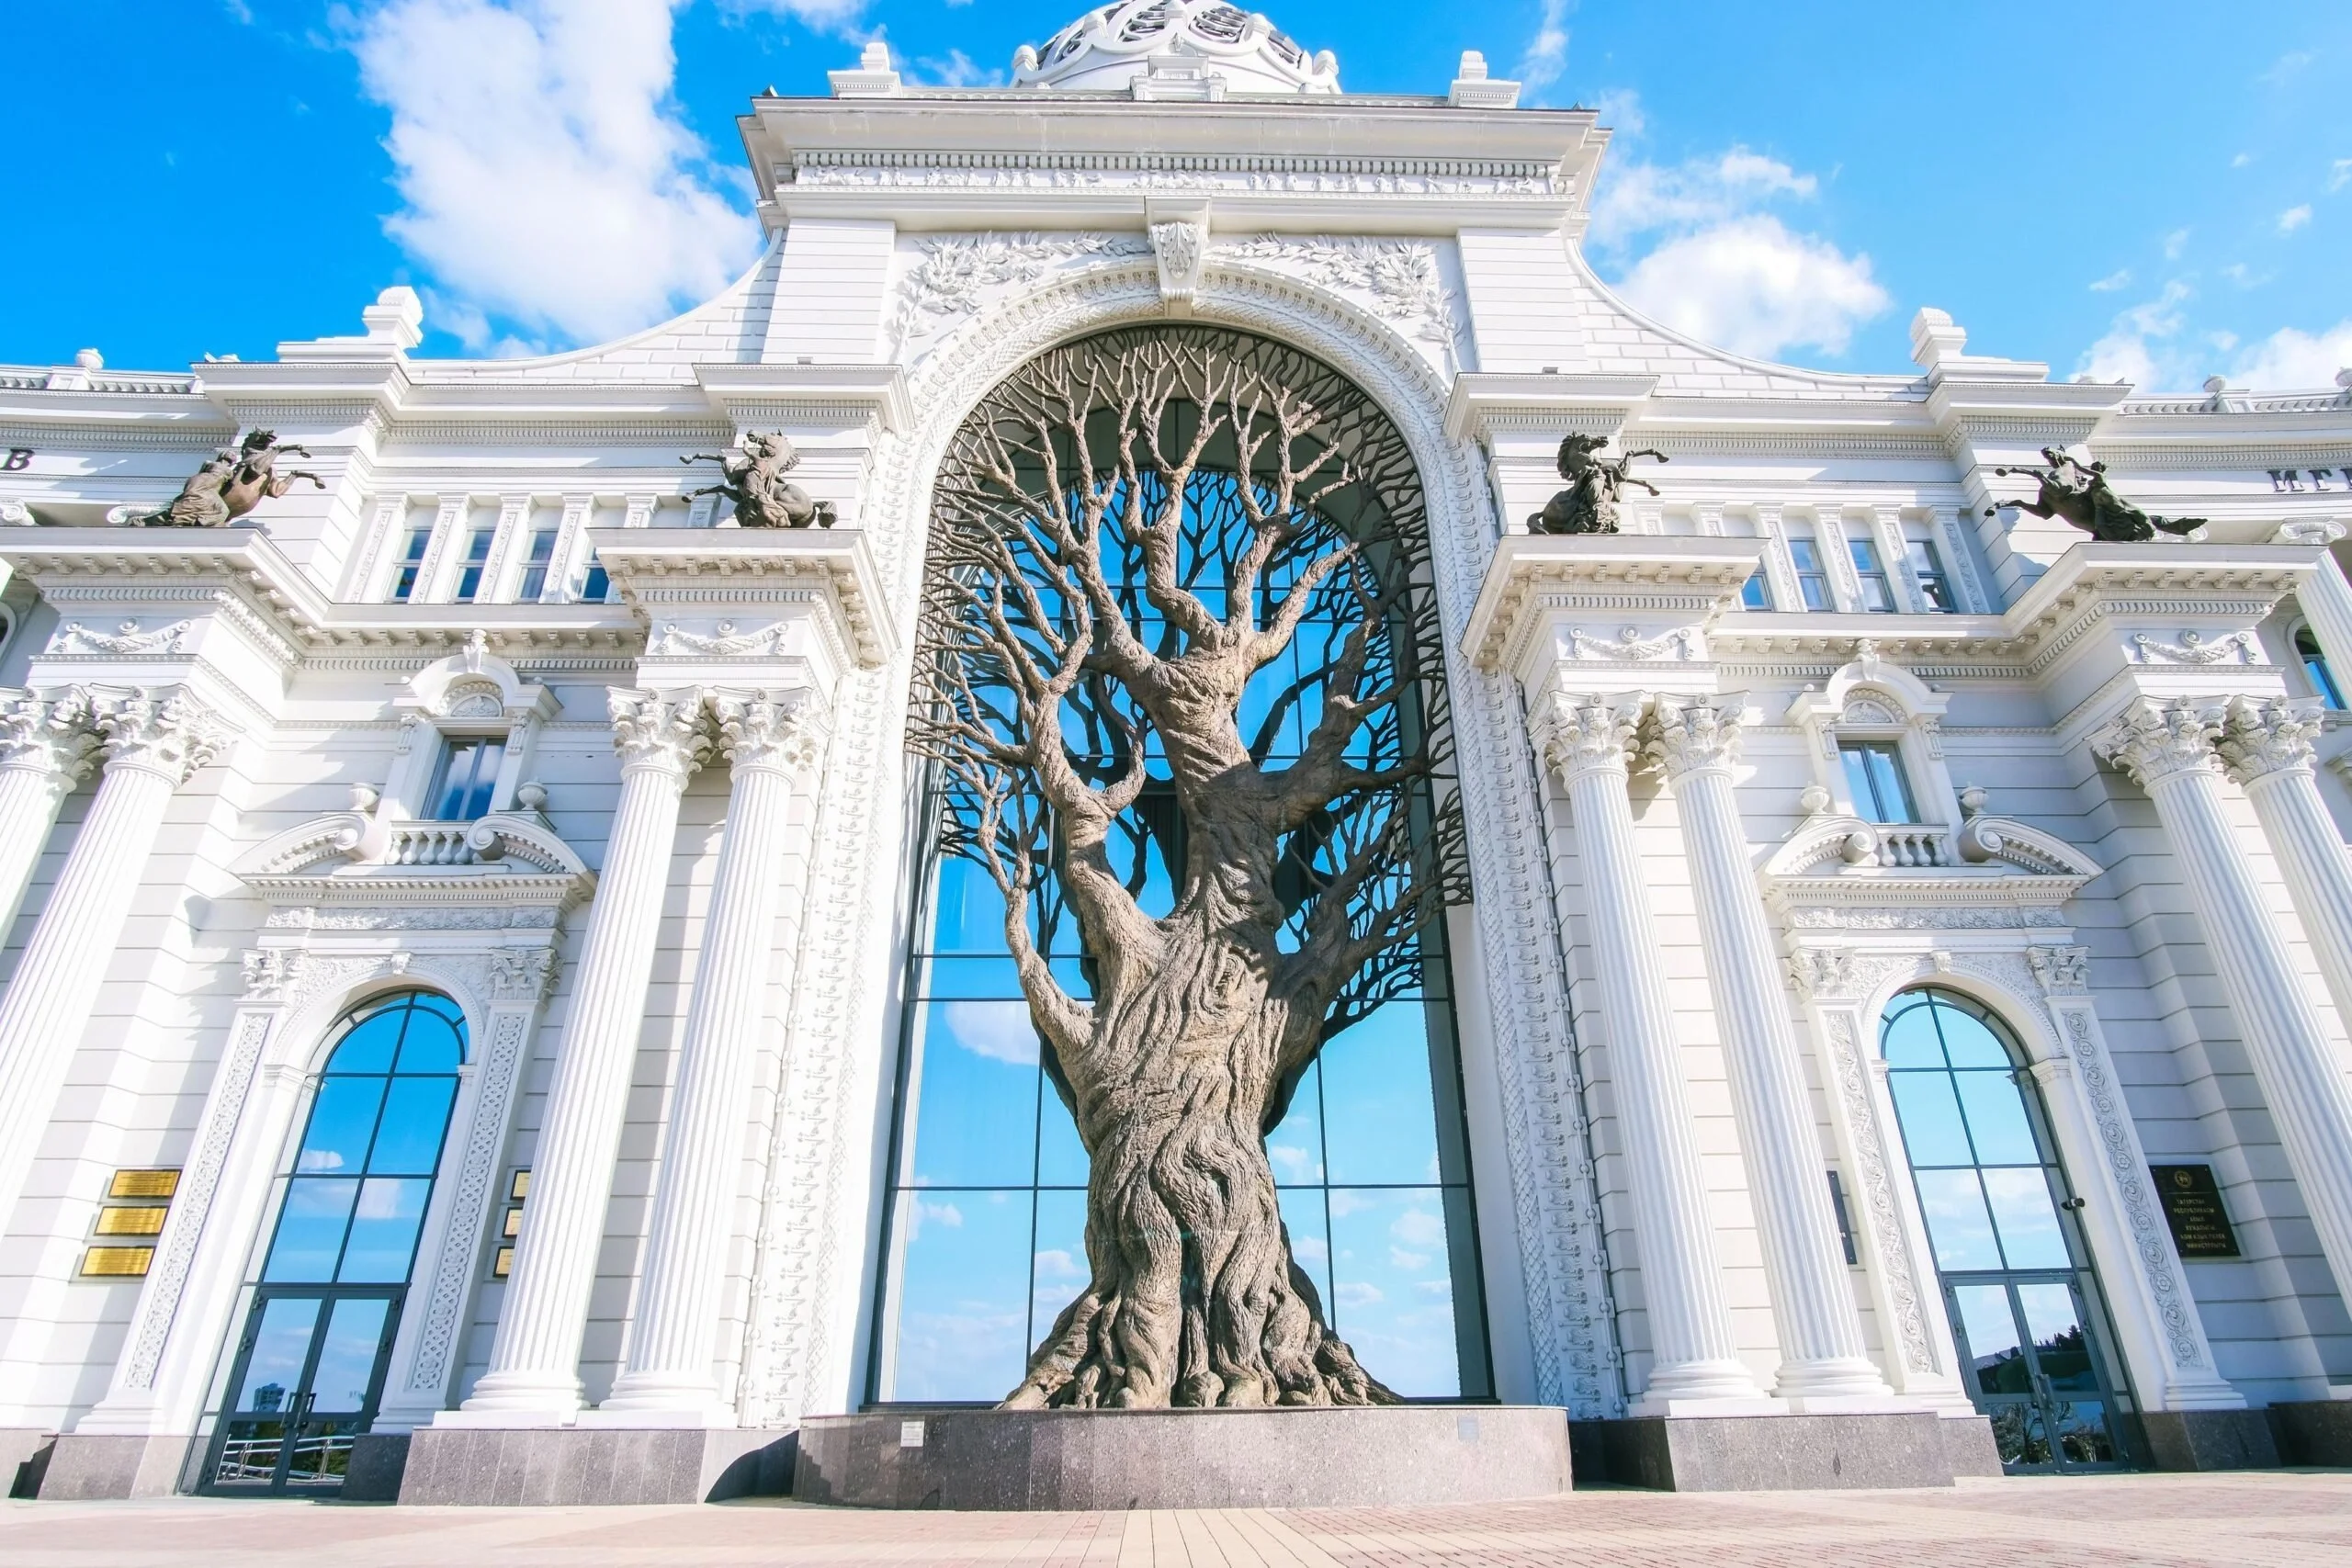 Farmer's Palace in Kazan; enormous, beautiful building with a large tree growing in the central portcullis